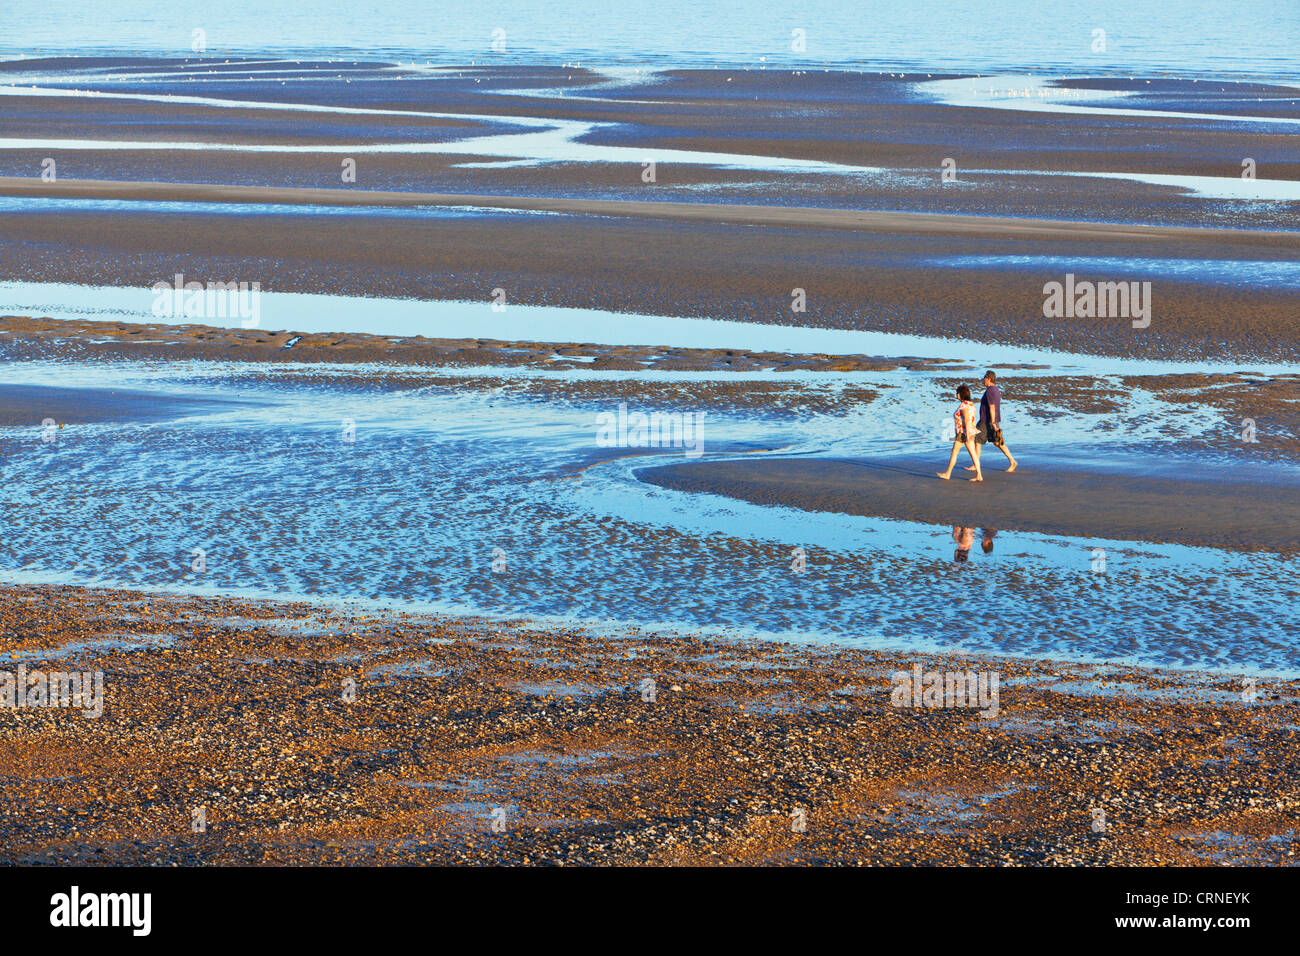 A man and a woman walking together along a sandy beach at low tide. Stock Photo